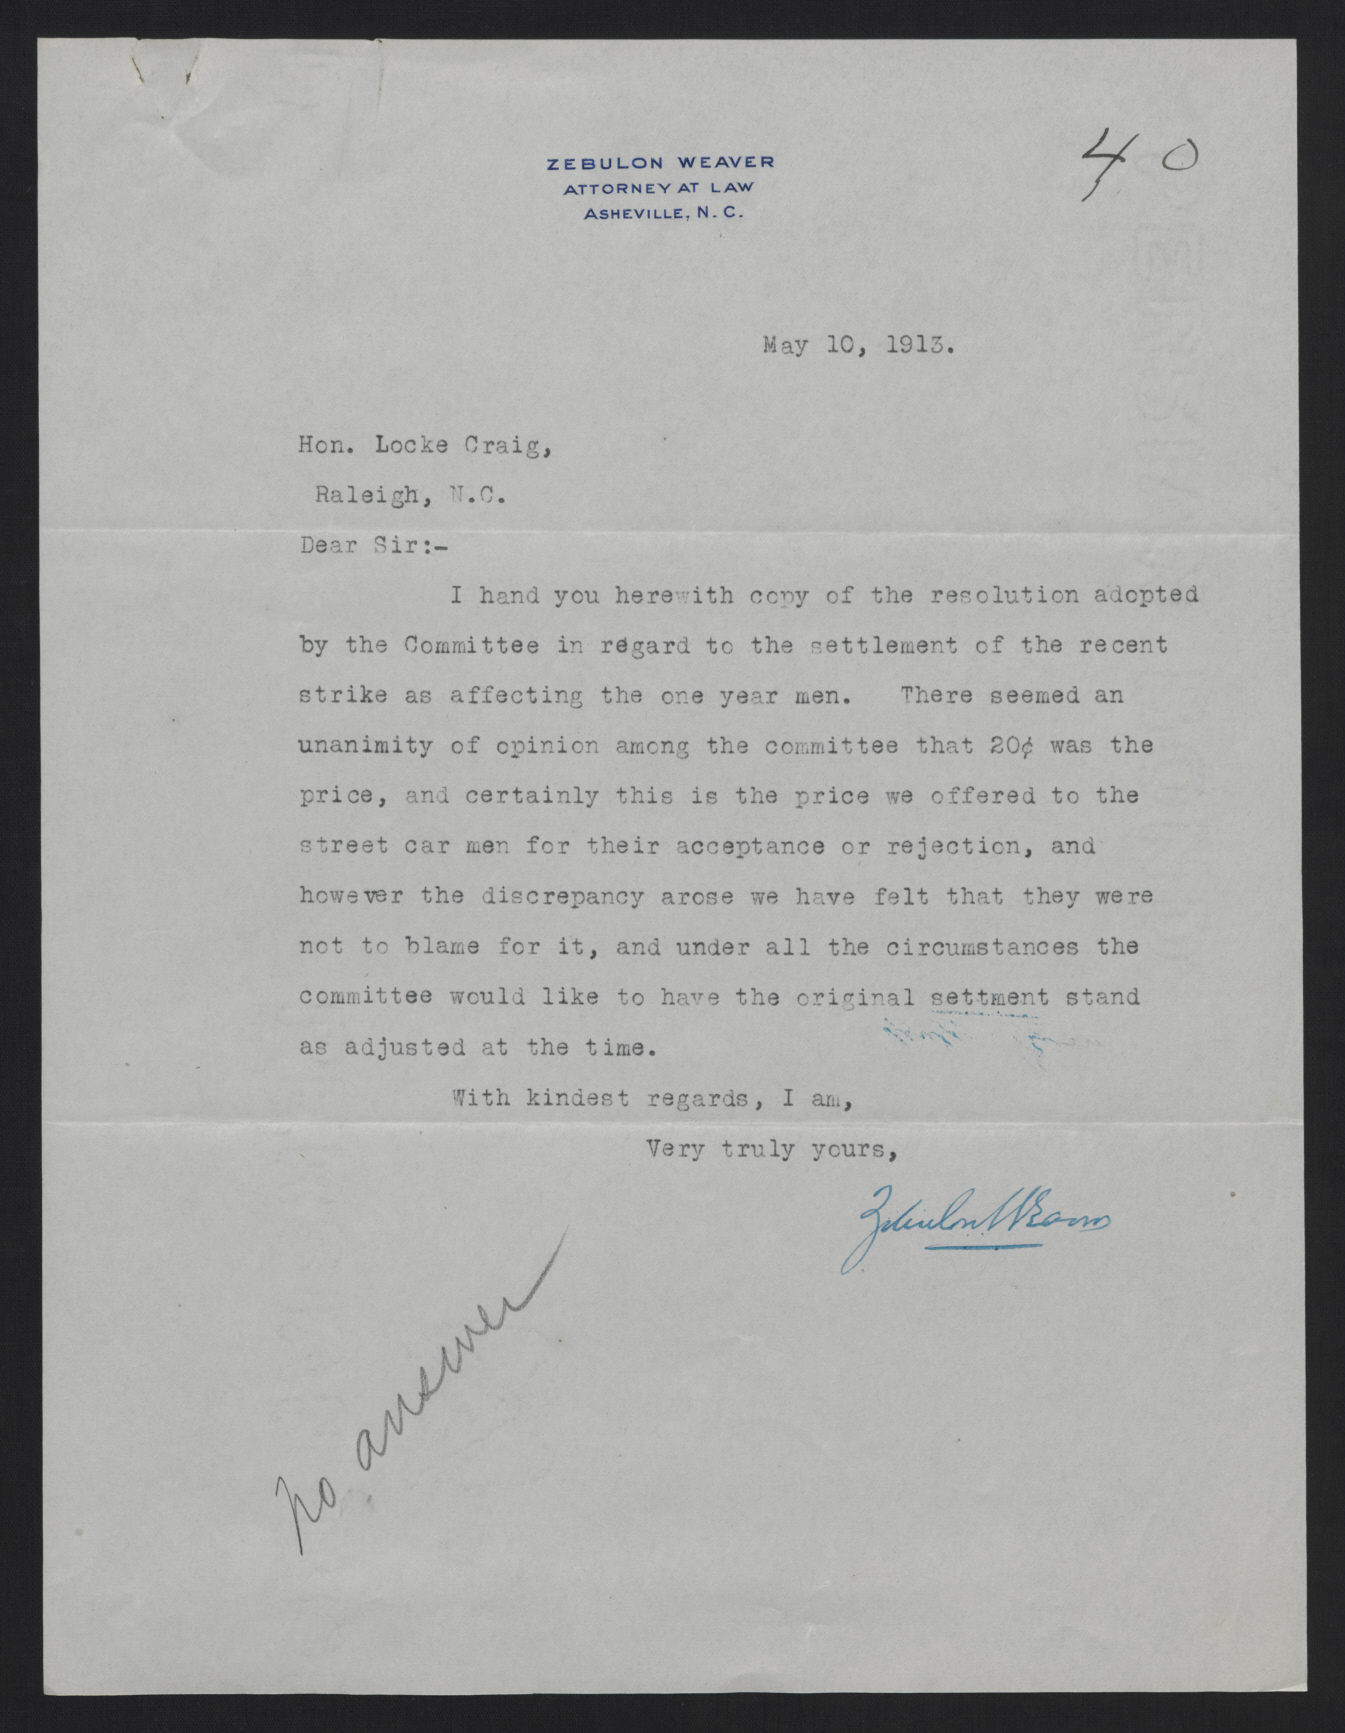 Letter from Weaver to Craig, May 10, 1913